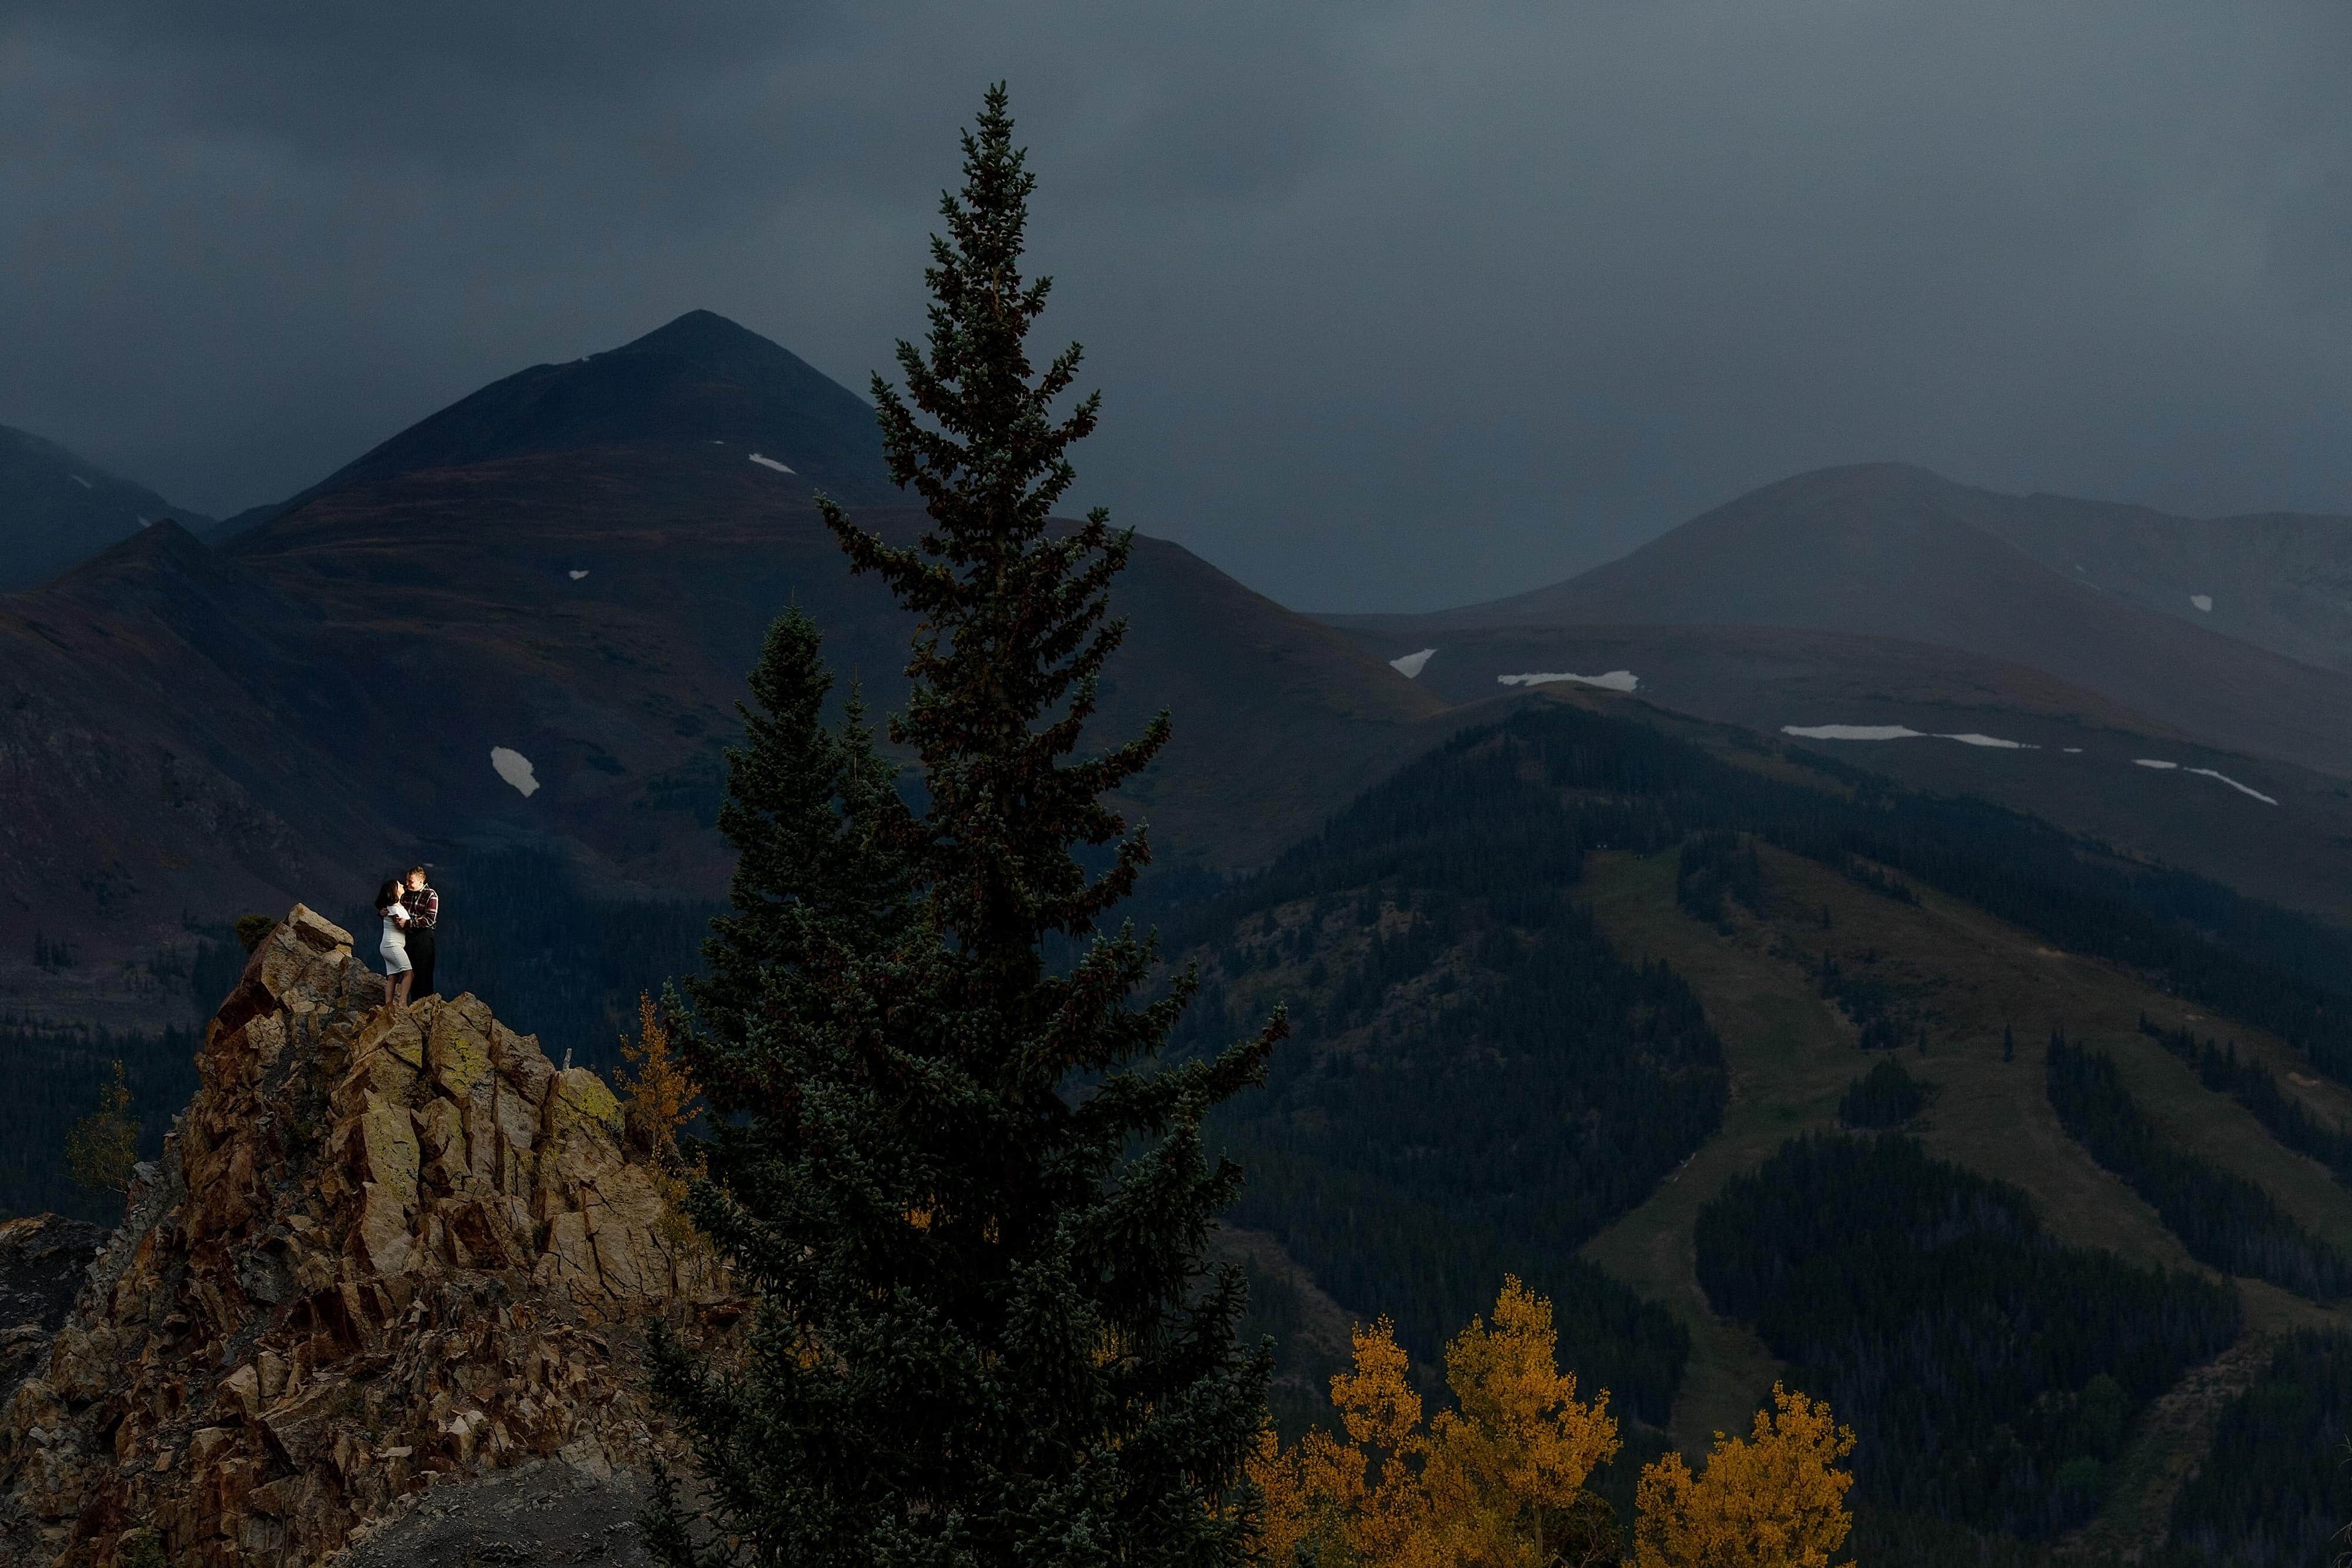 Joseph and Shabnam embrace during their Breckenridge fall colors engagement photos on a rock face along Boreas Pass road